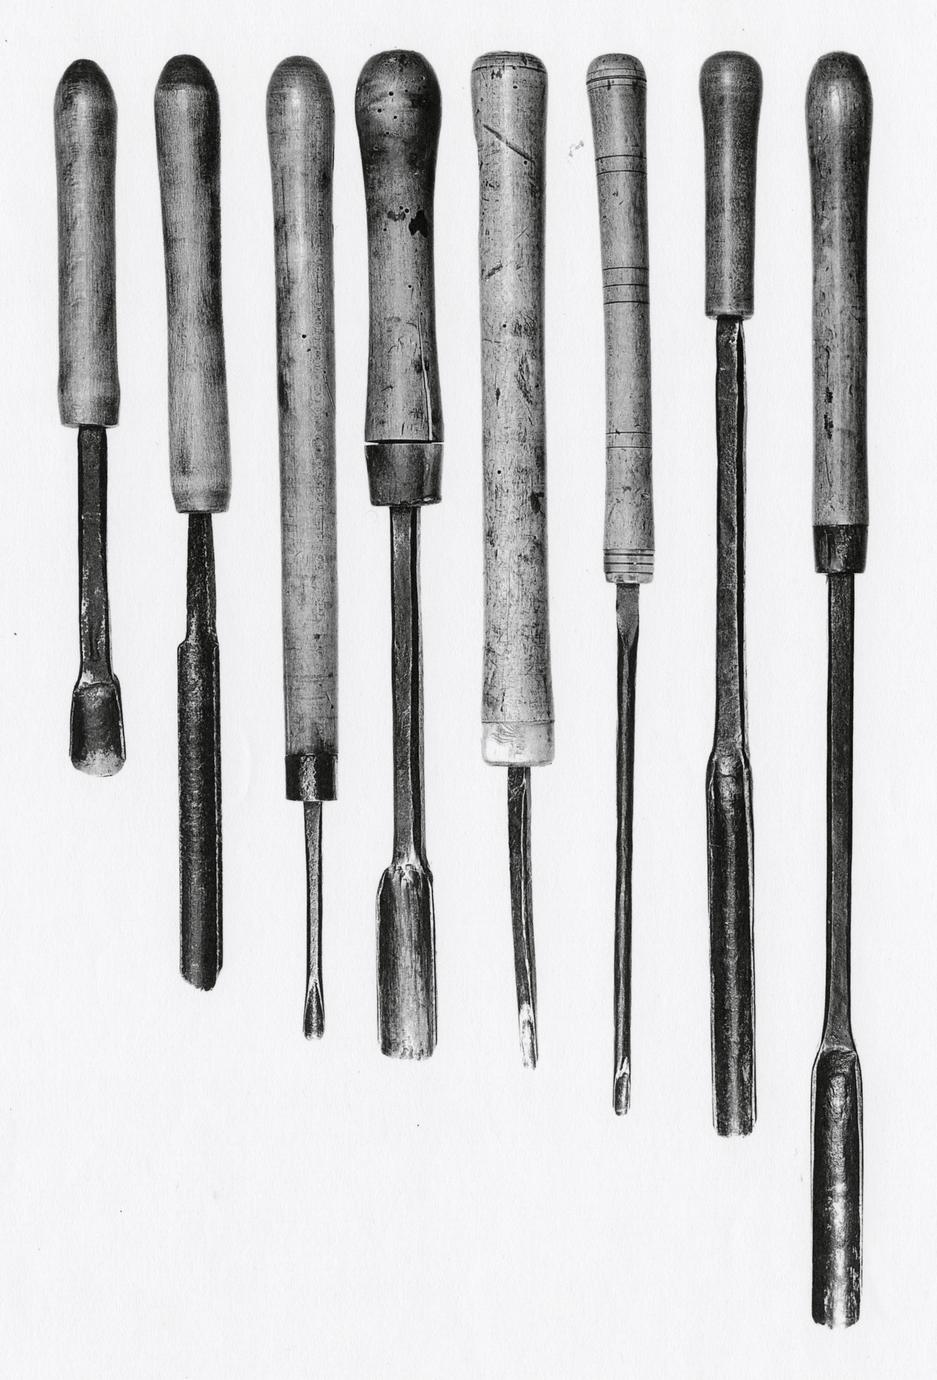 Eight examples of turning gouges of different sizes.